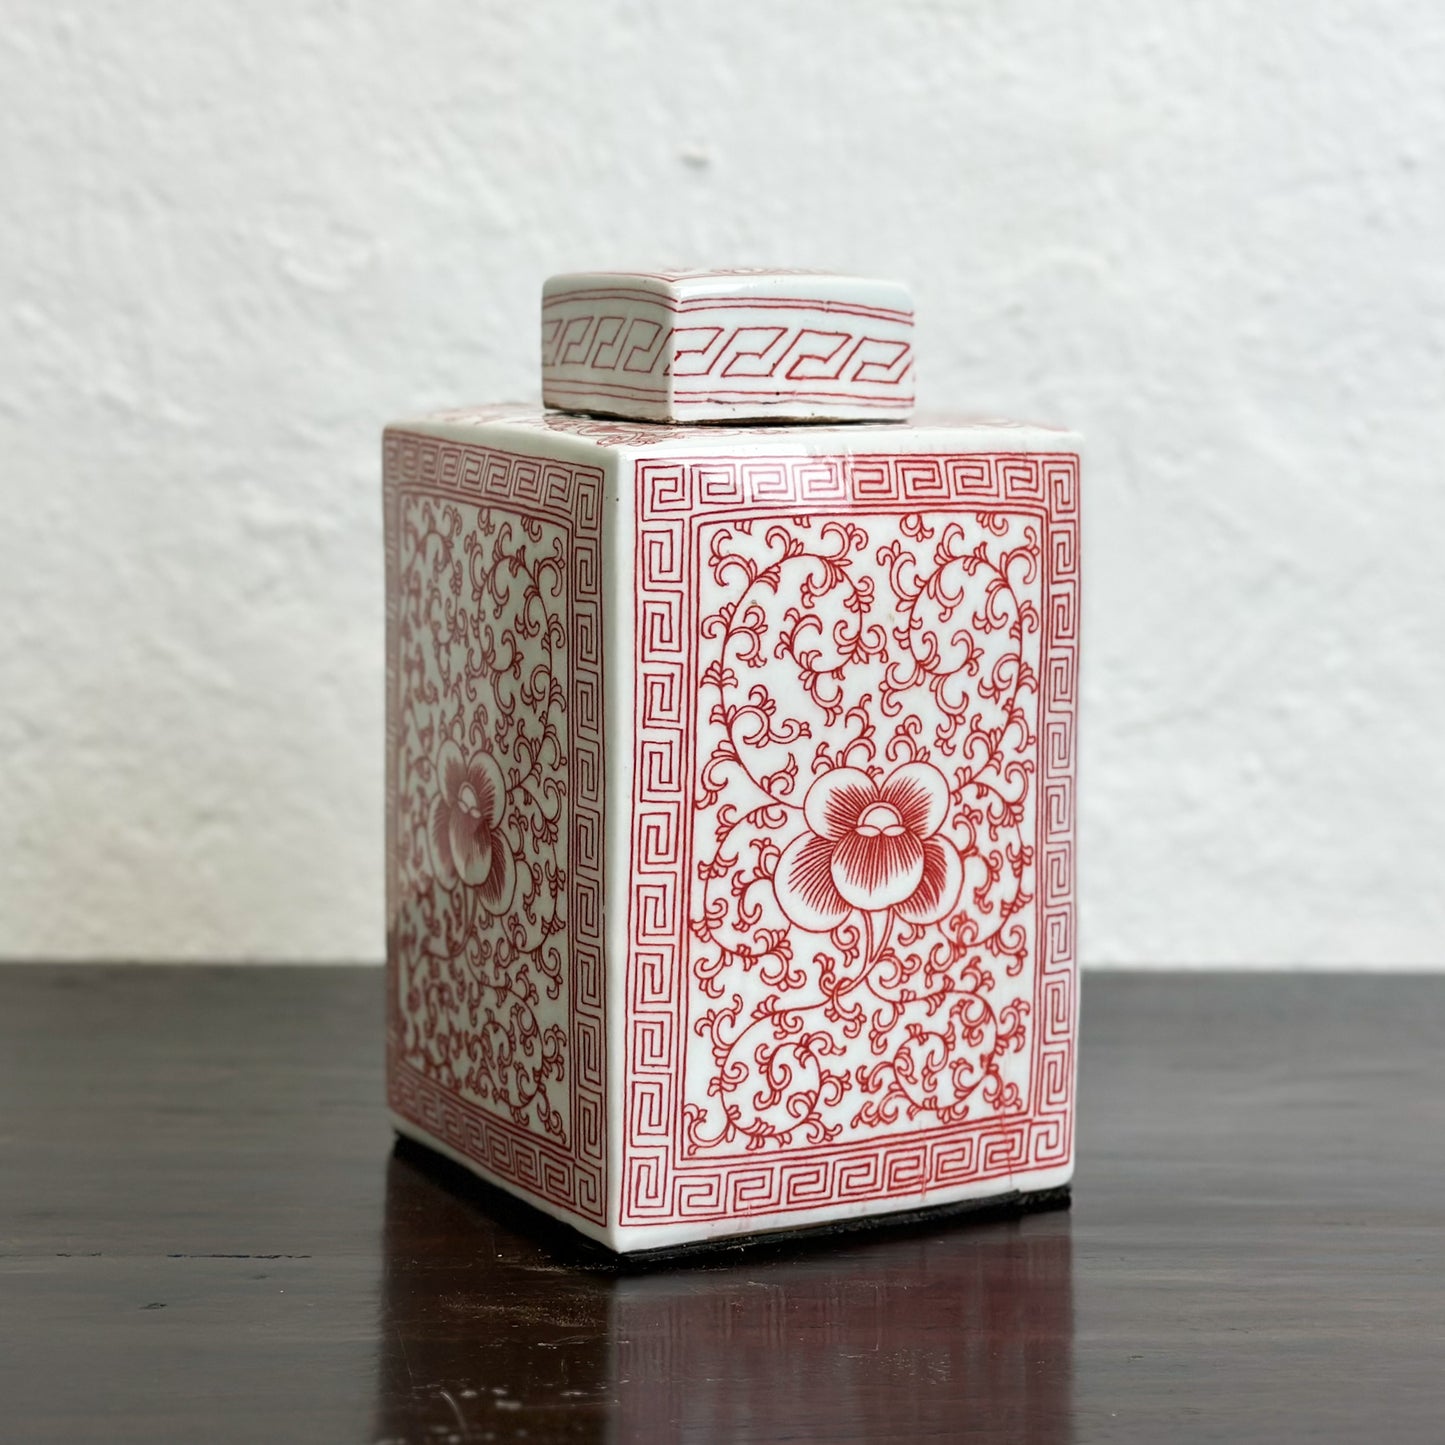 Chinese-Porcelain-Square-Tea-Container-Vermillion-Red-and-White-Prunus-Flower-Vines2